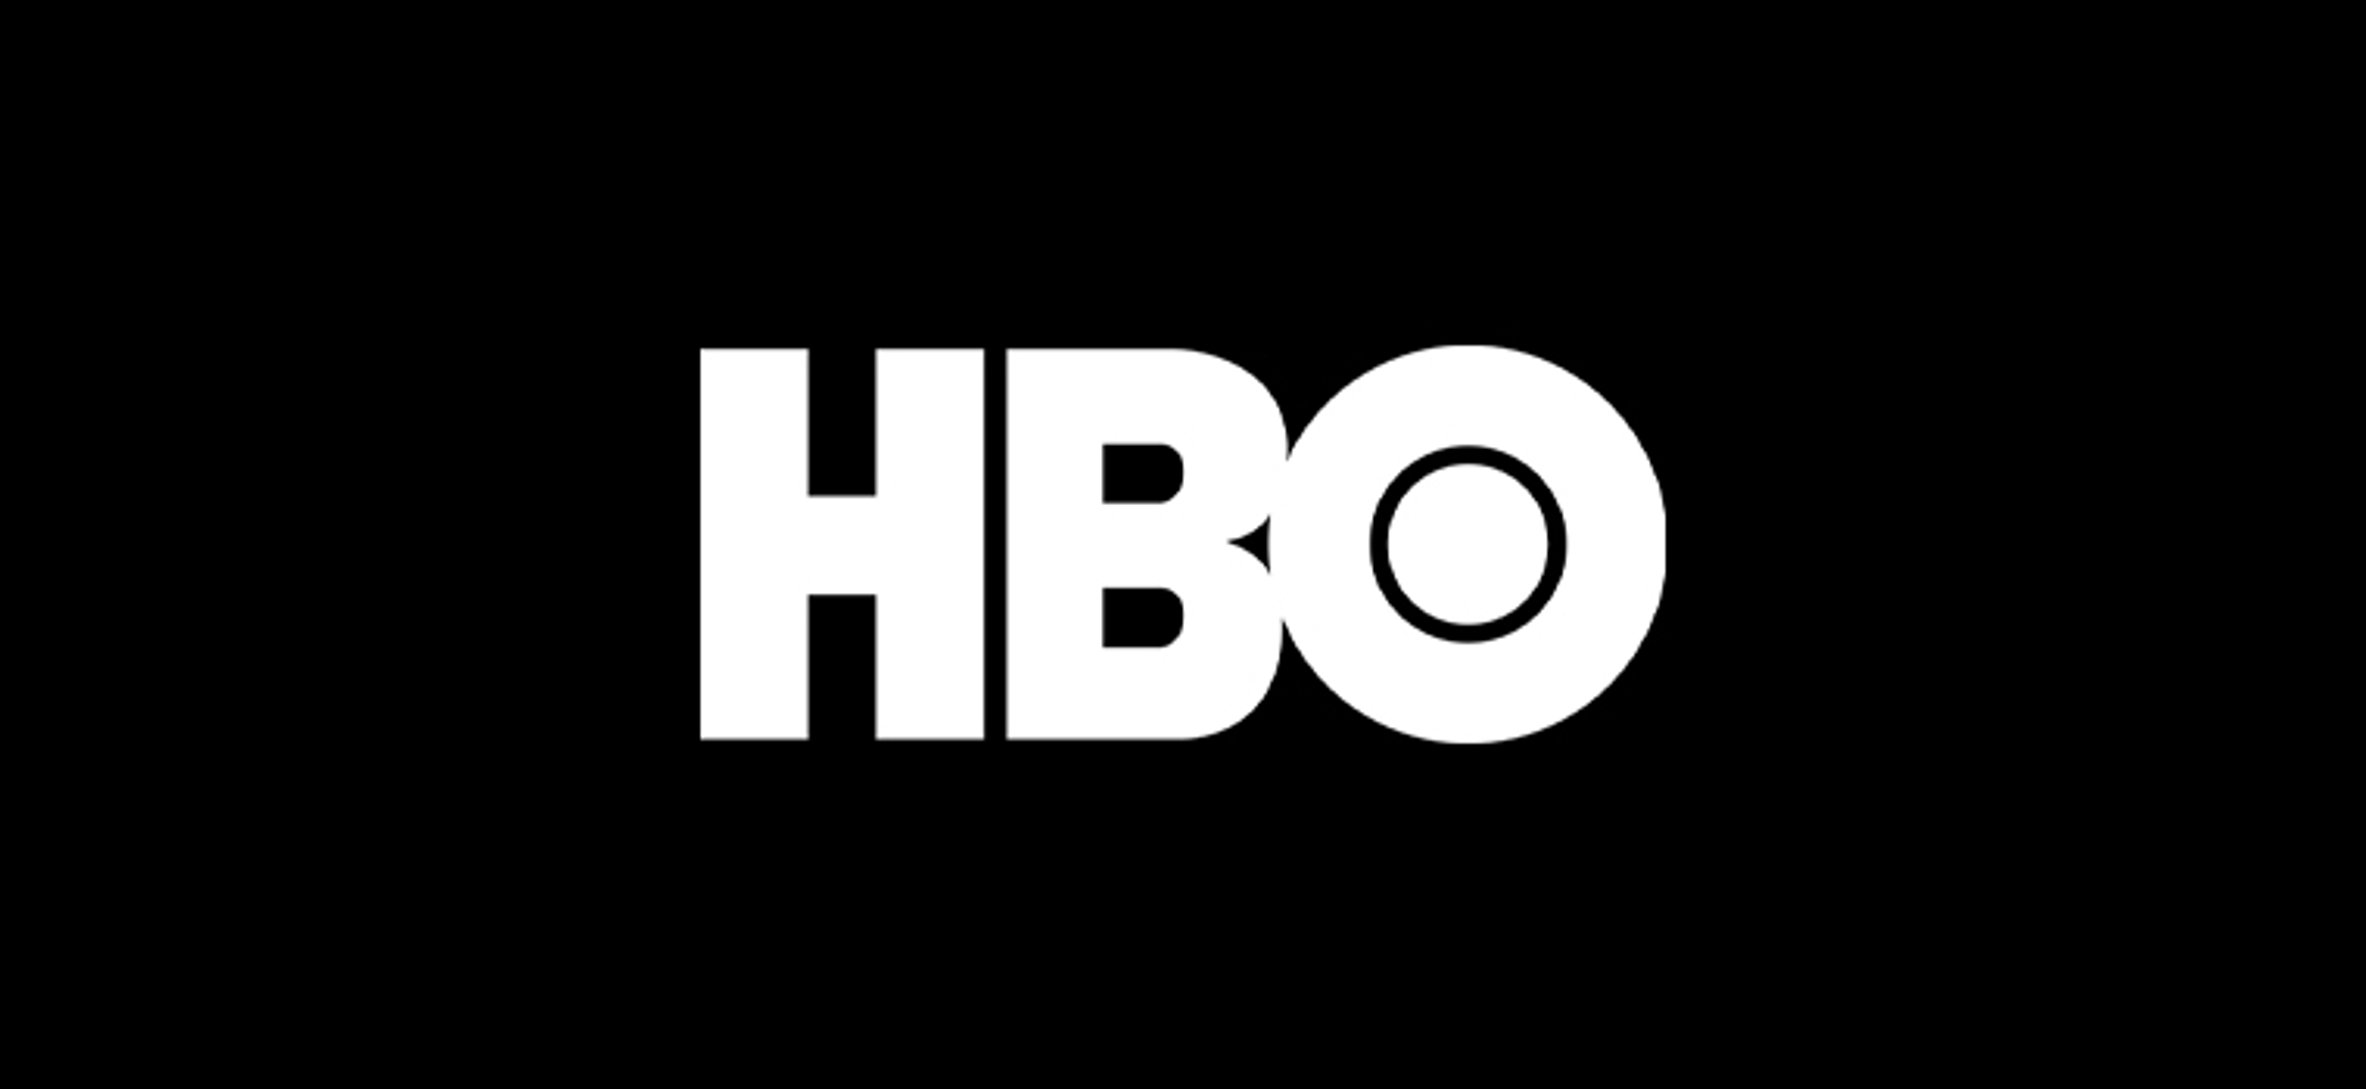 HBO’s The Outsider is Casting for Stripper Roles